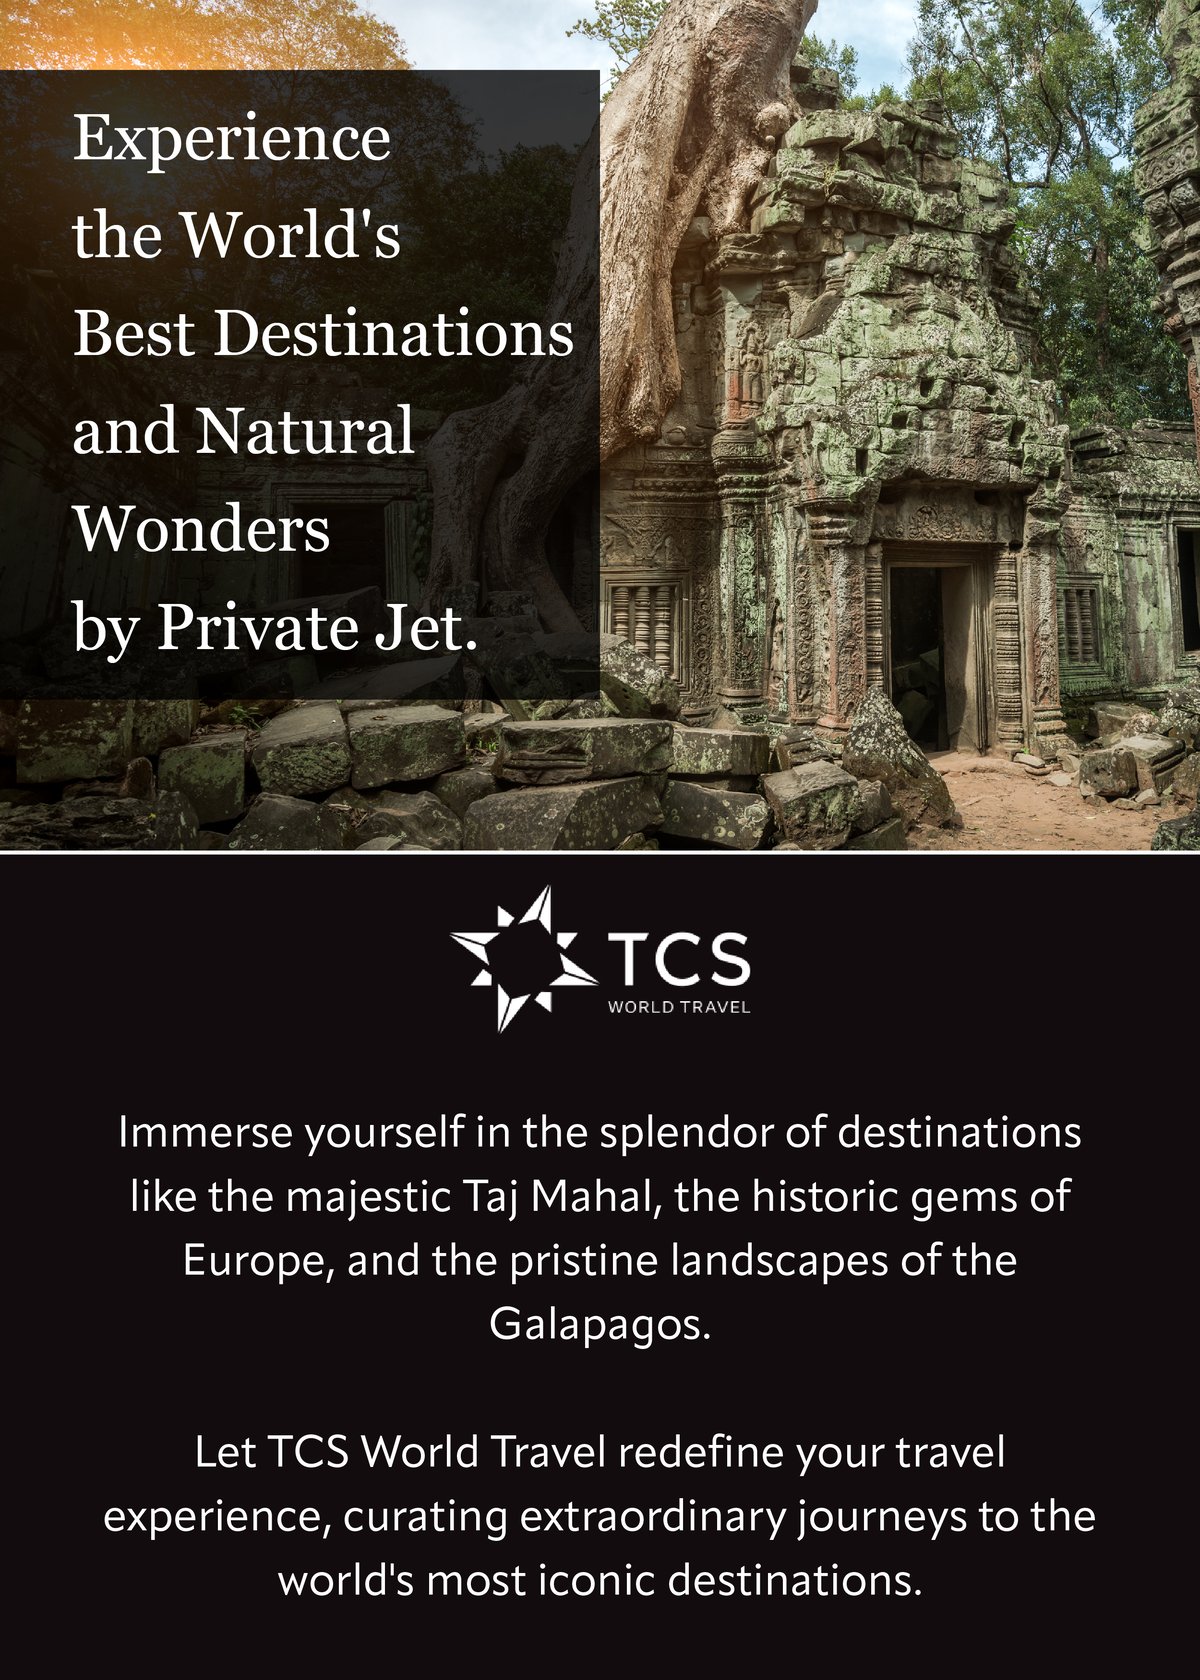 Experience the World with TCS